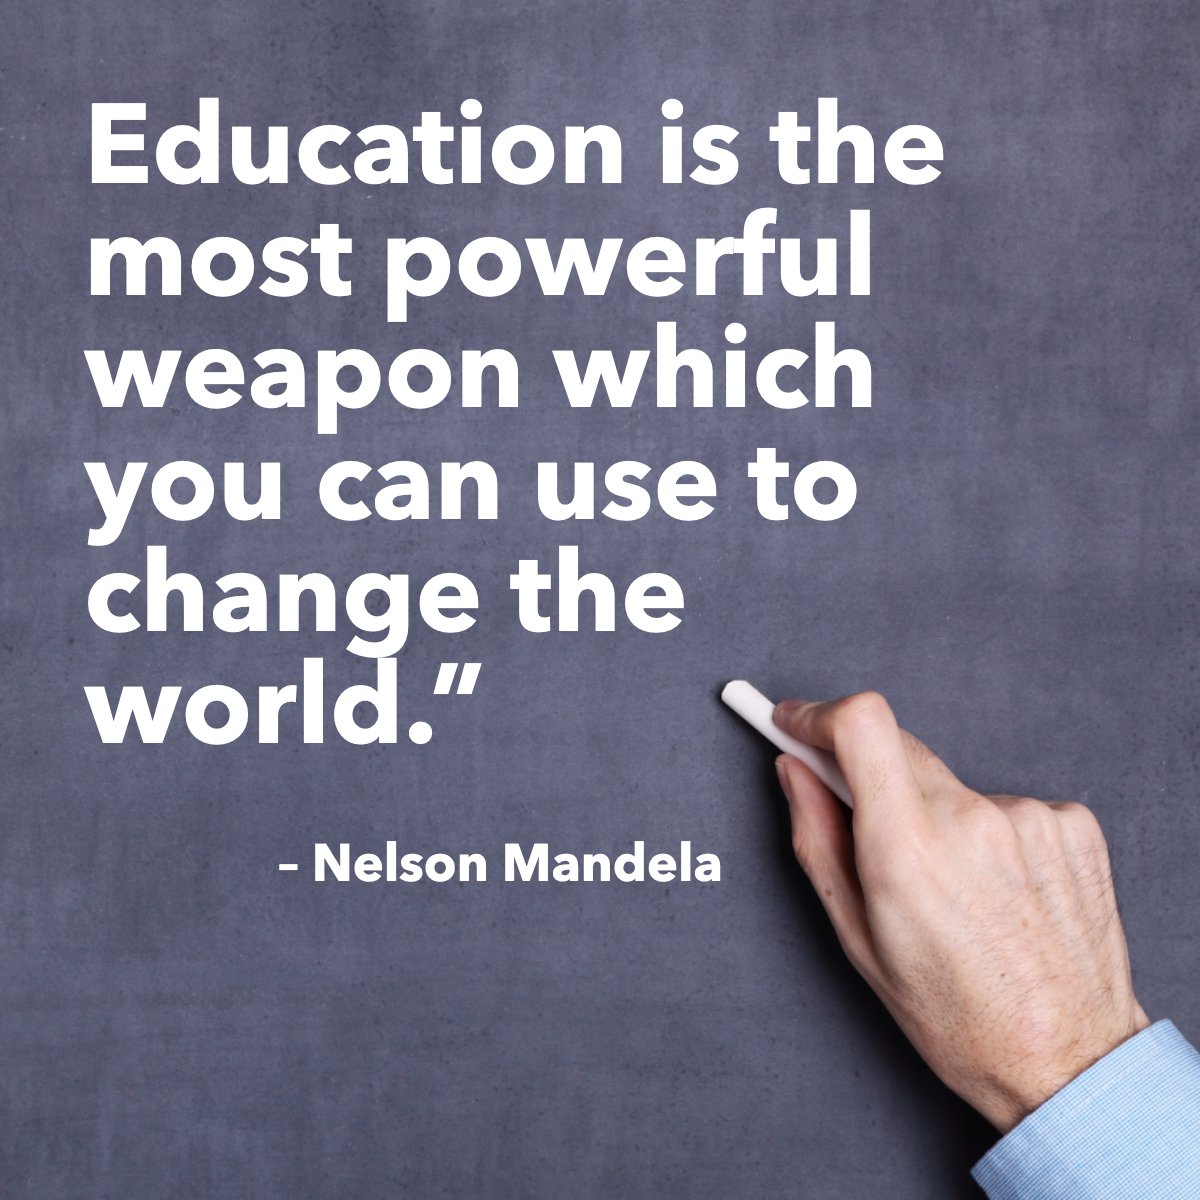 'Education is the most powerful weapon which you can use to change the world' 
— Nelson Mandela  📖

#educationquotes #wisdomquote #wisdomoftheday #quotegram #quoteoftheday #nelsonmandela #educationispower
 #CanvasRE #MonicaMendesRealtor